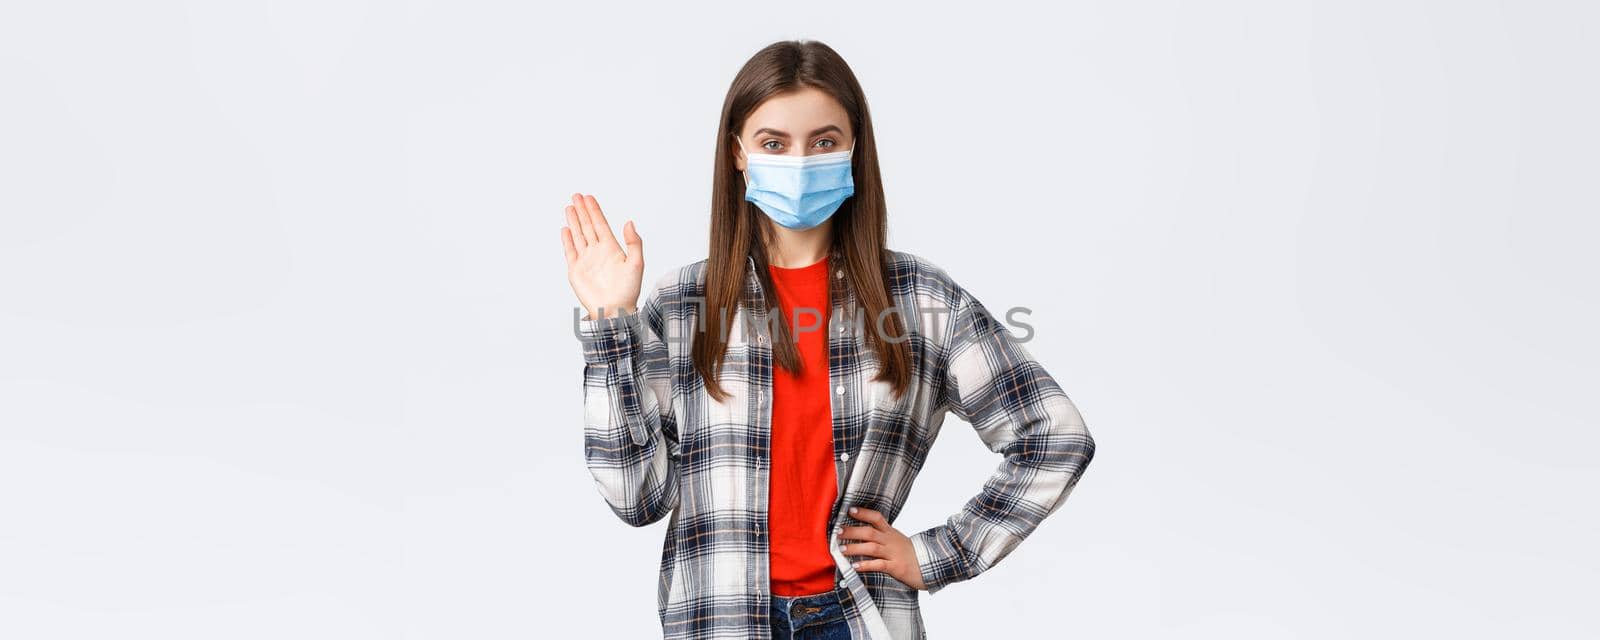 Different emotions, covid-19 pandemic, coronavirus self-quarantine and social distancing concept. Cheerful woman in medical mask, employee working from home, say hi waving hand during video-chat.